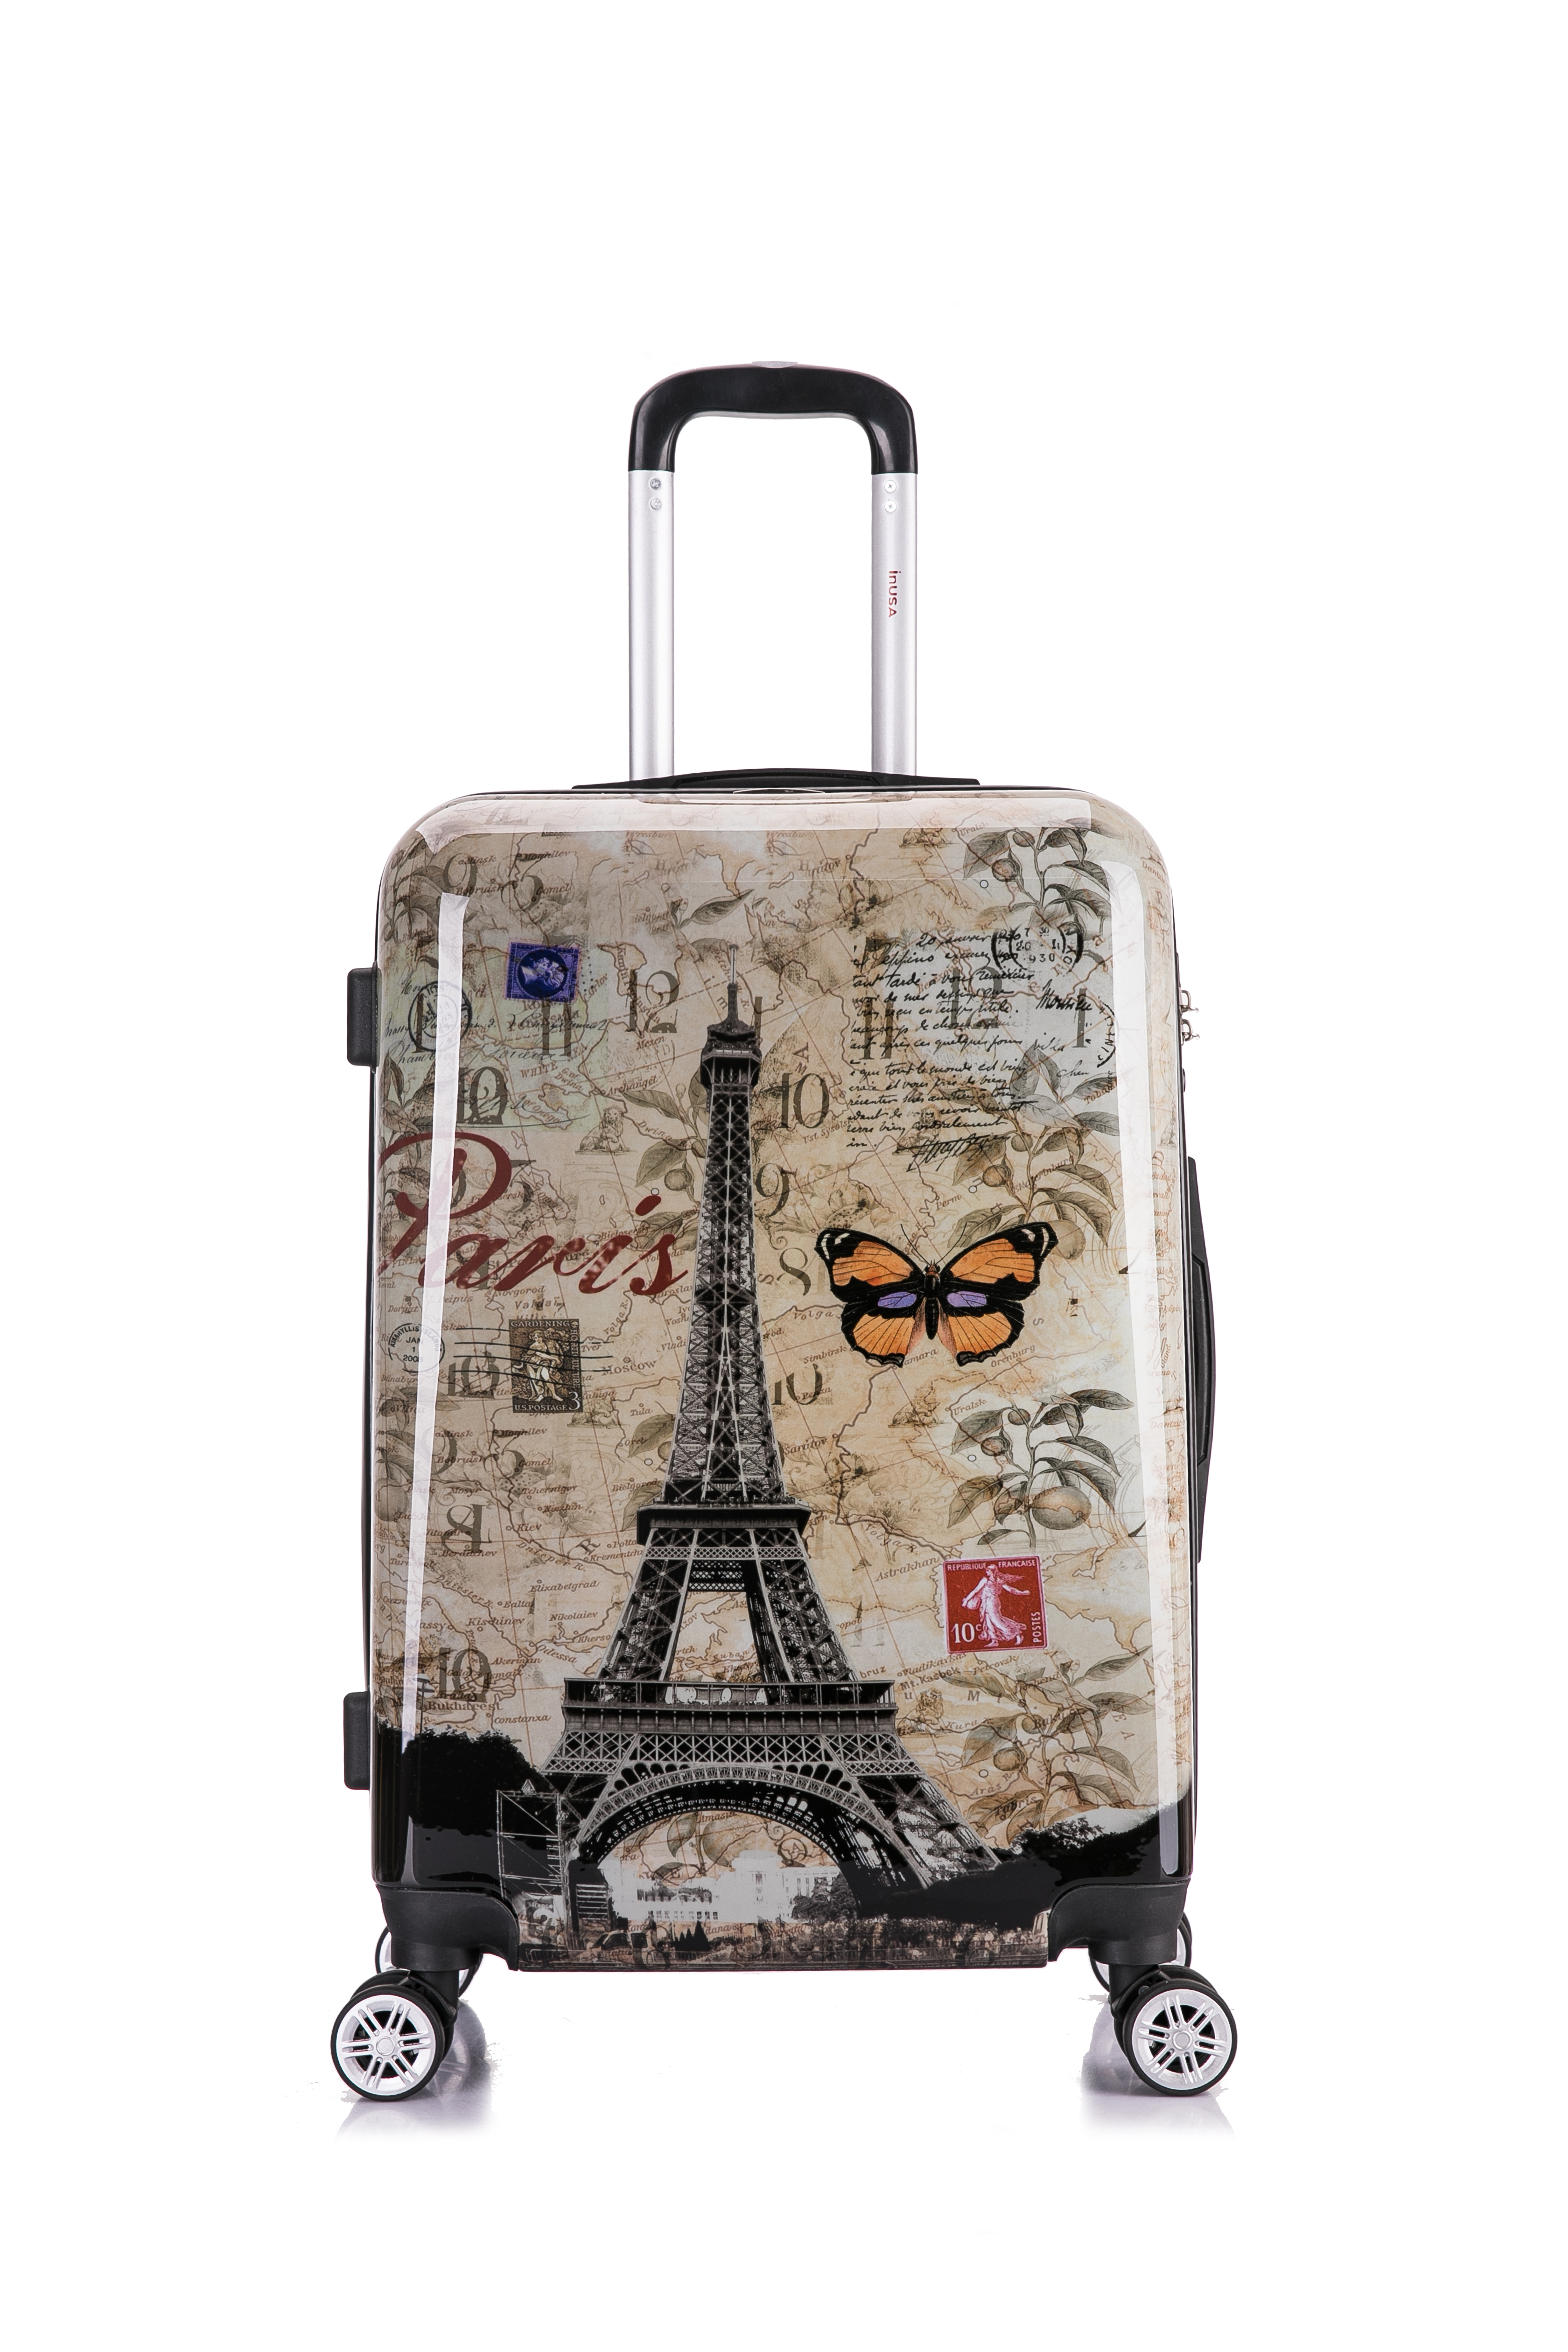 InUSA Print 24" Hardside Checked Luggage with Spinner Wheels, Handle and Trolley, Paris - image 3 of 15